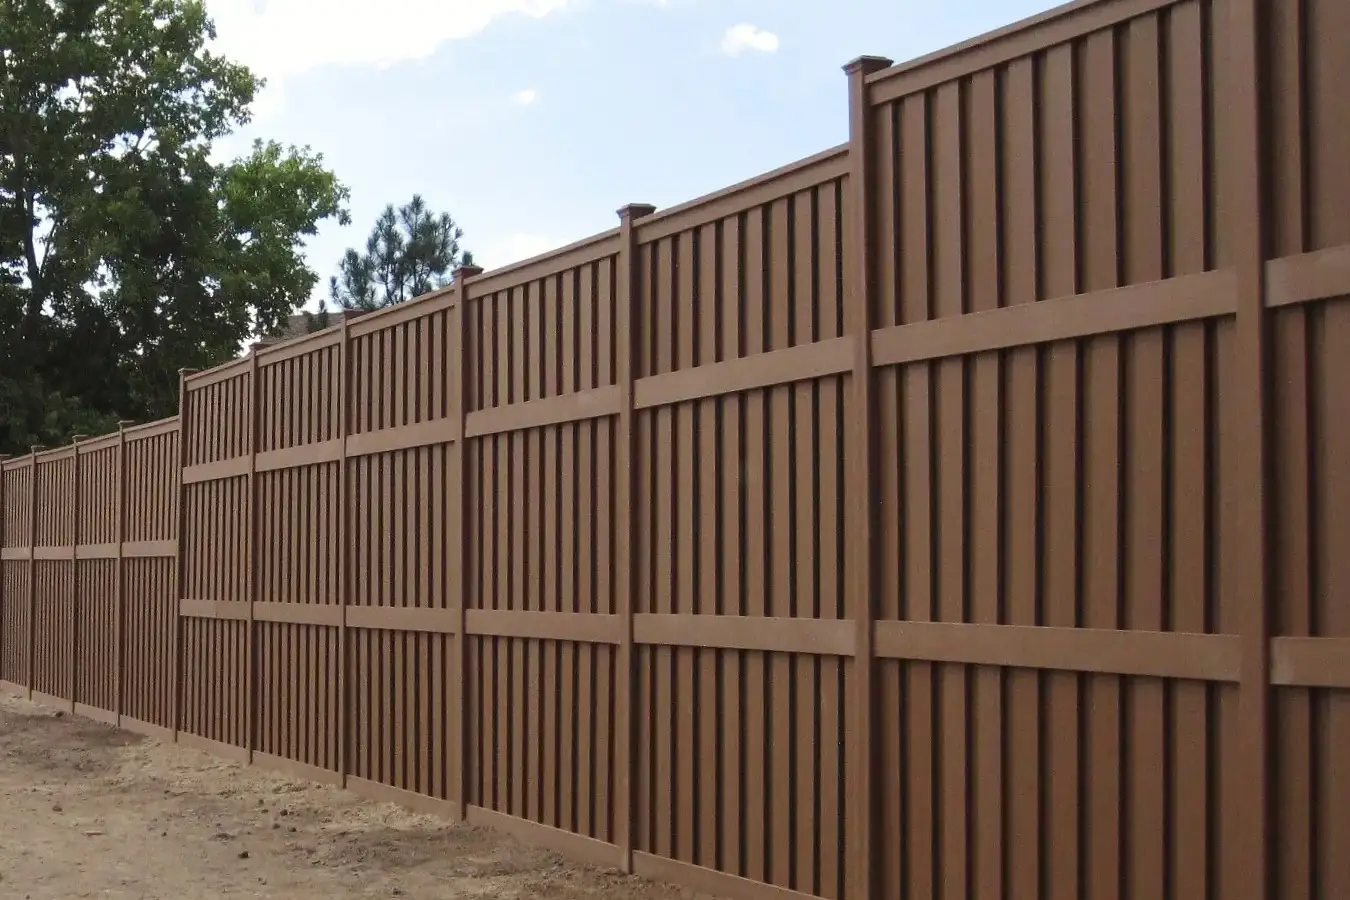 A Trex Fence built from 10 foot to 12 foot tall